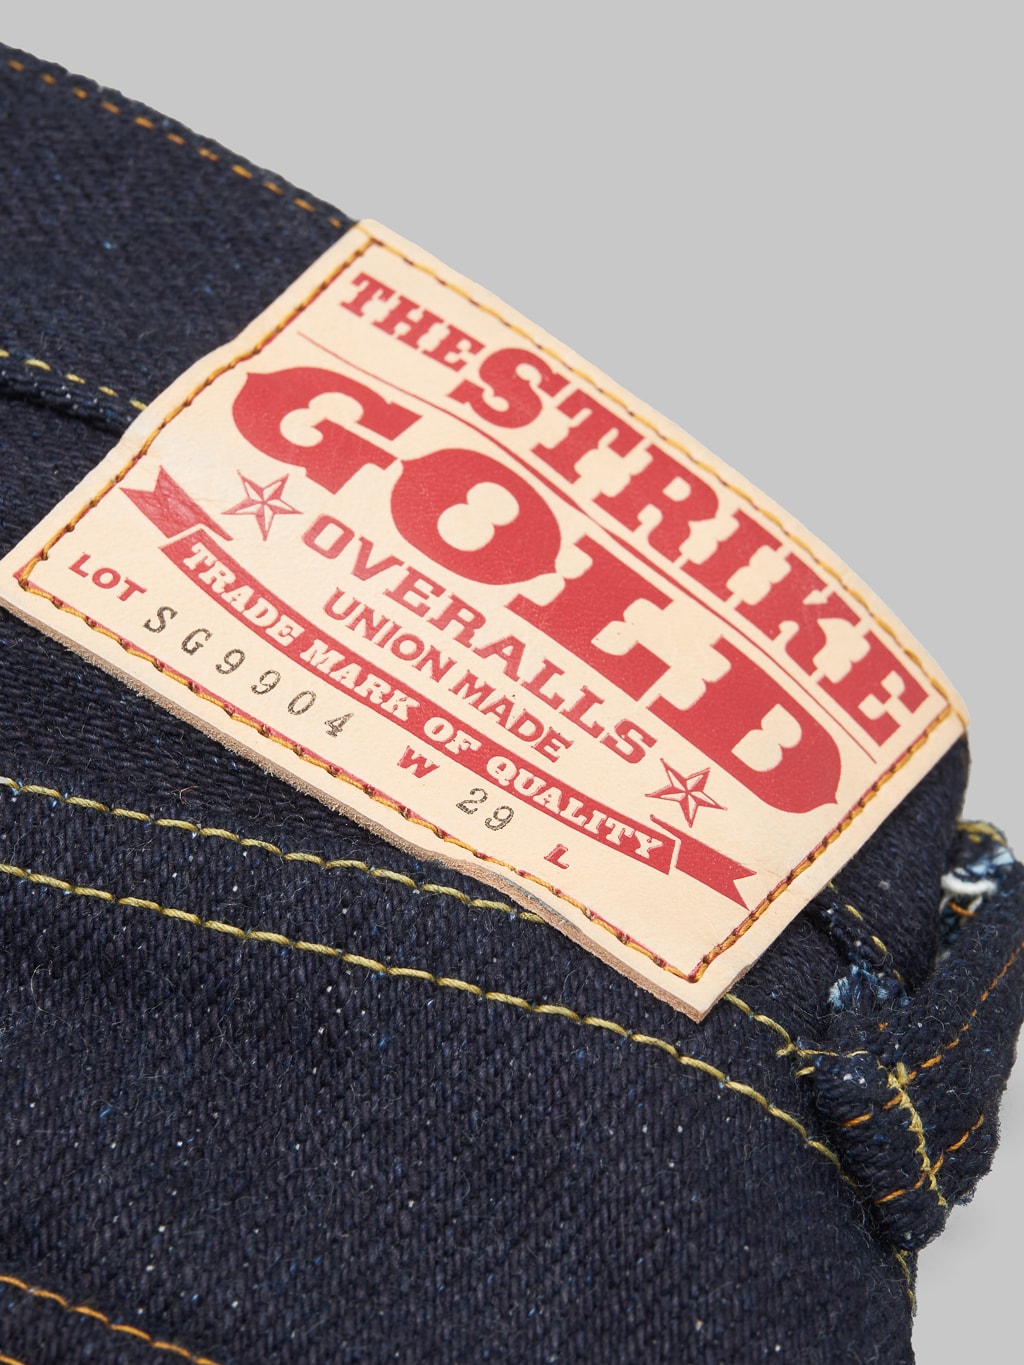 The Strike Gold Extra Heavyweight straight tapered jeans brand patch